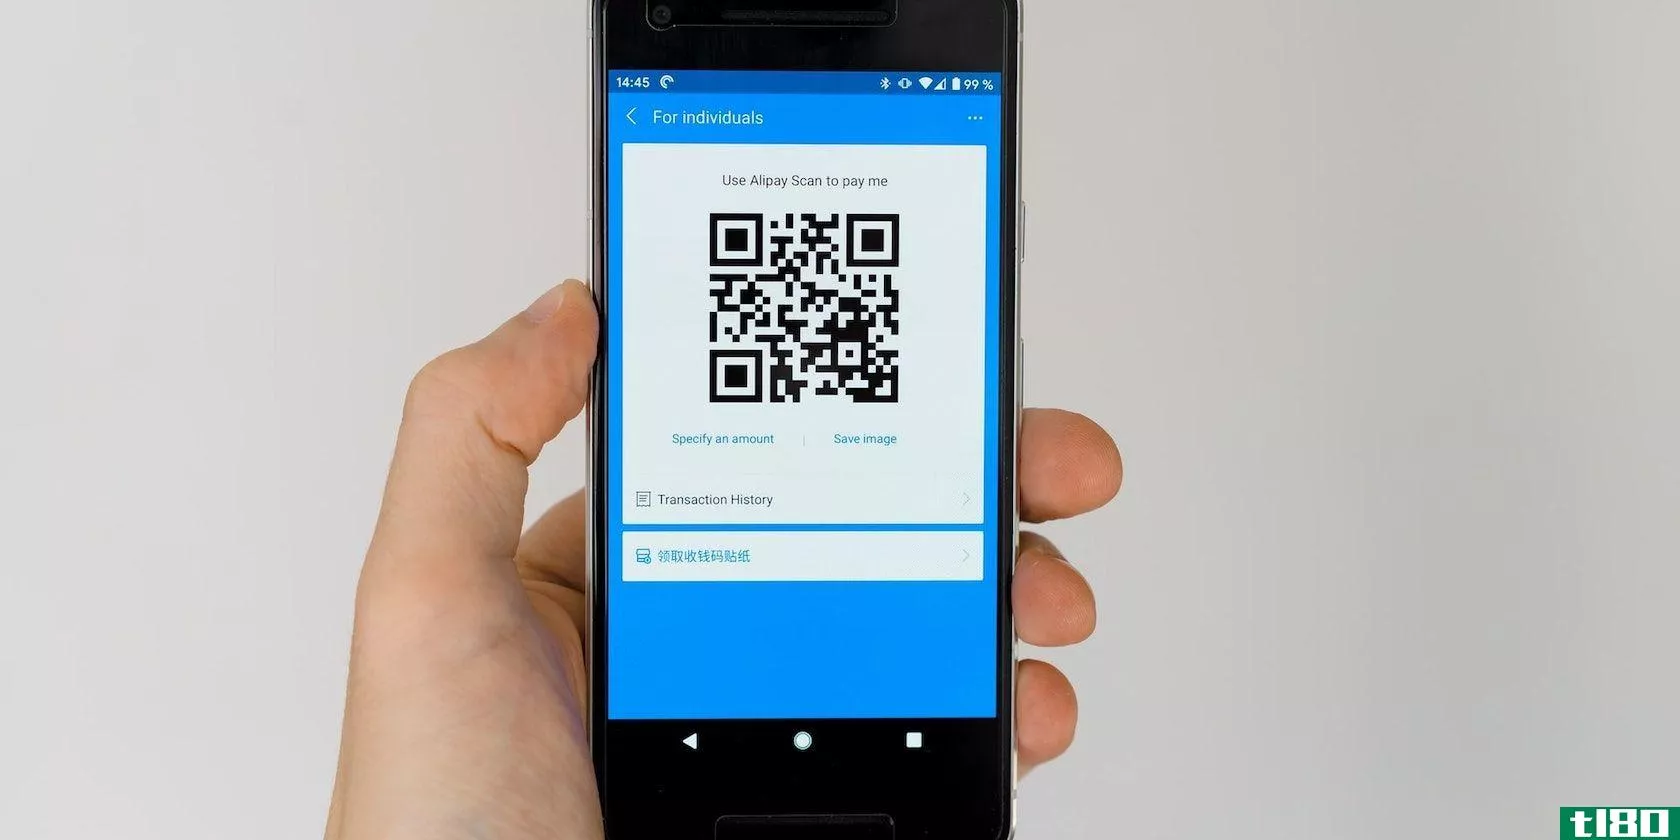 A photograph showing a QR code on a mobile phone screen